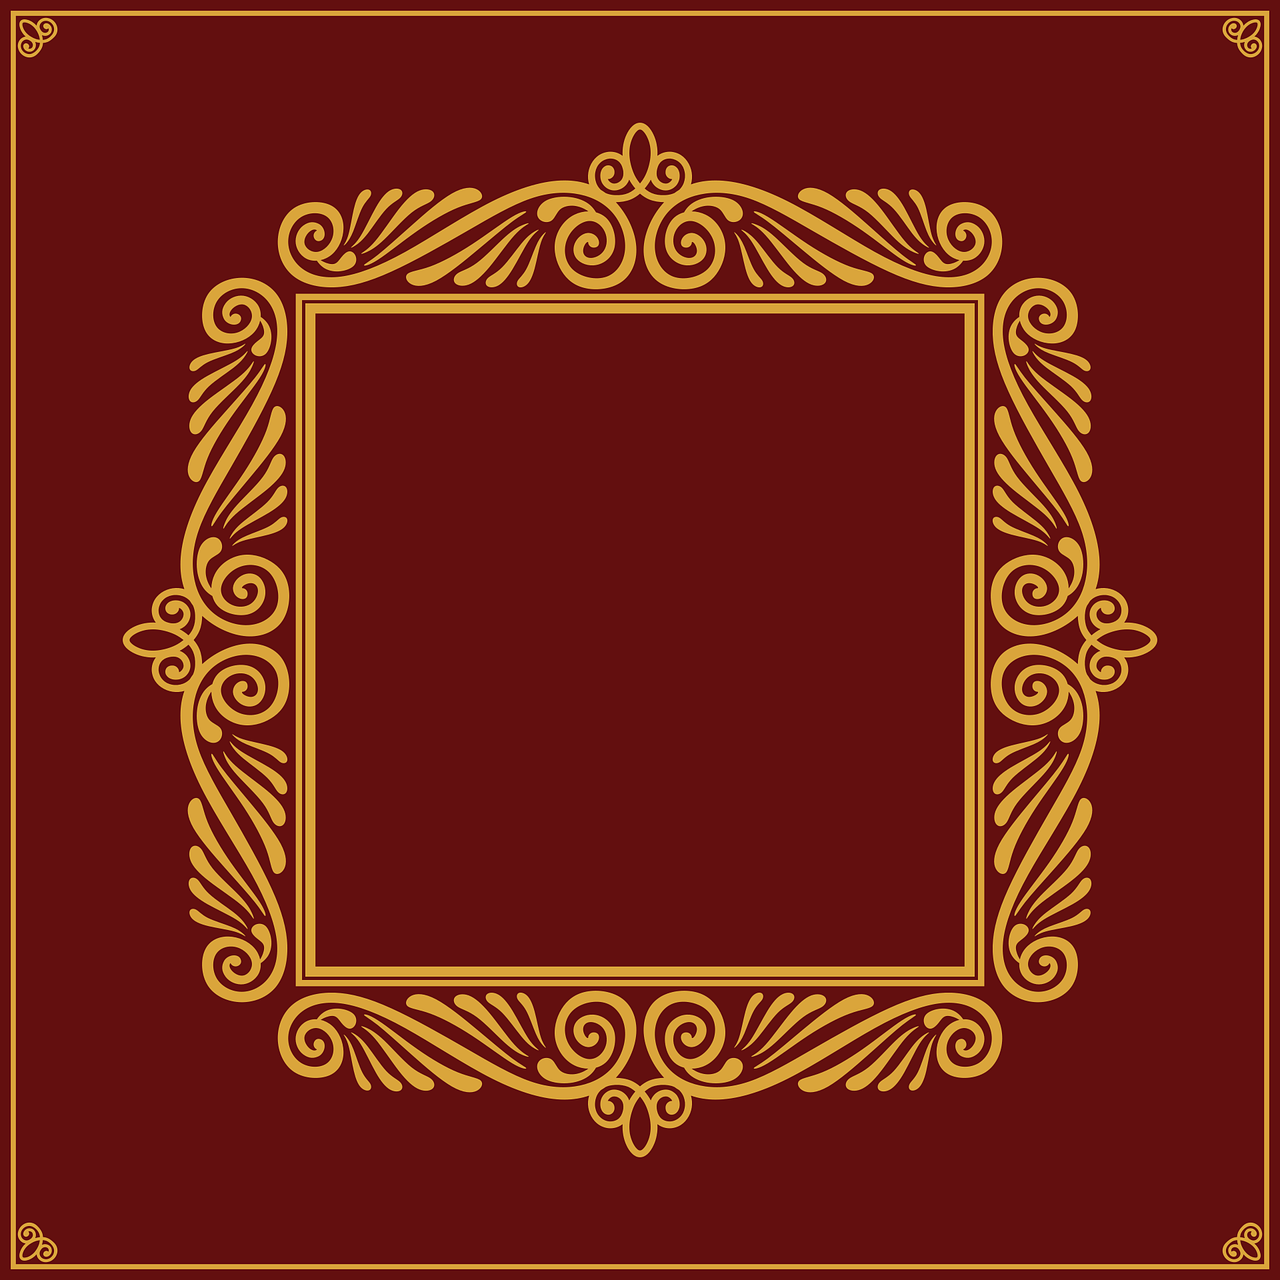 a golden frame on a red background, vector art, by Andrei Kolkoutine, art deco, brown and gold color palette, album, ornate borders + concept art, on simple background